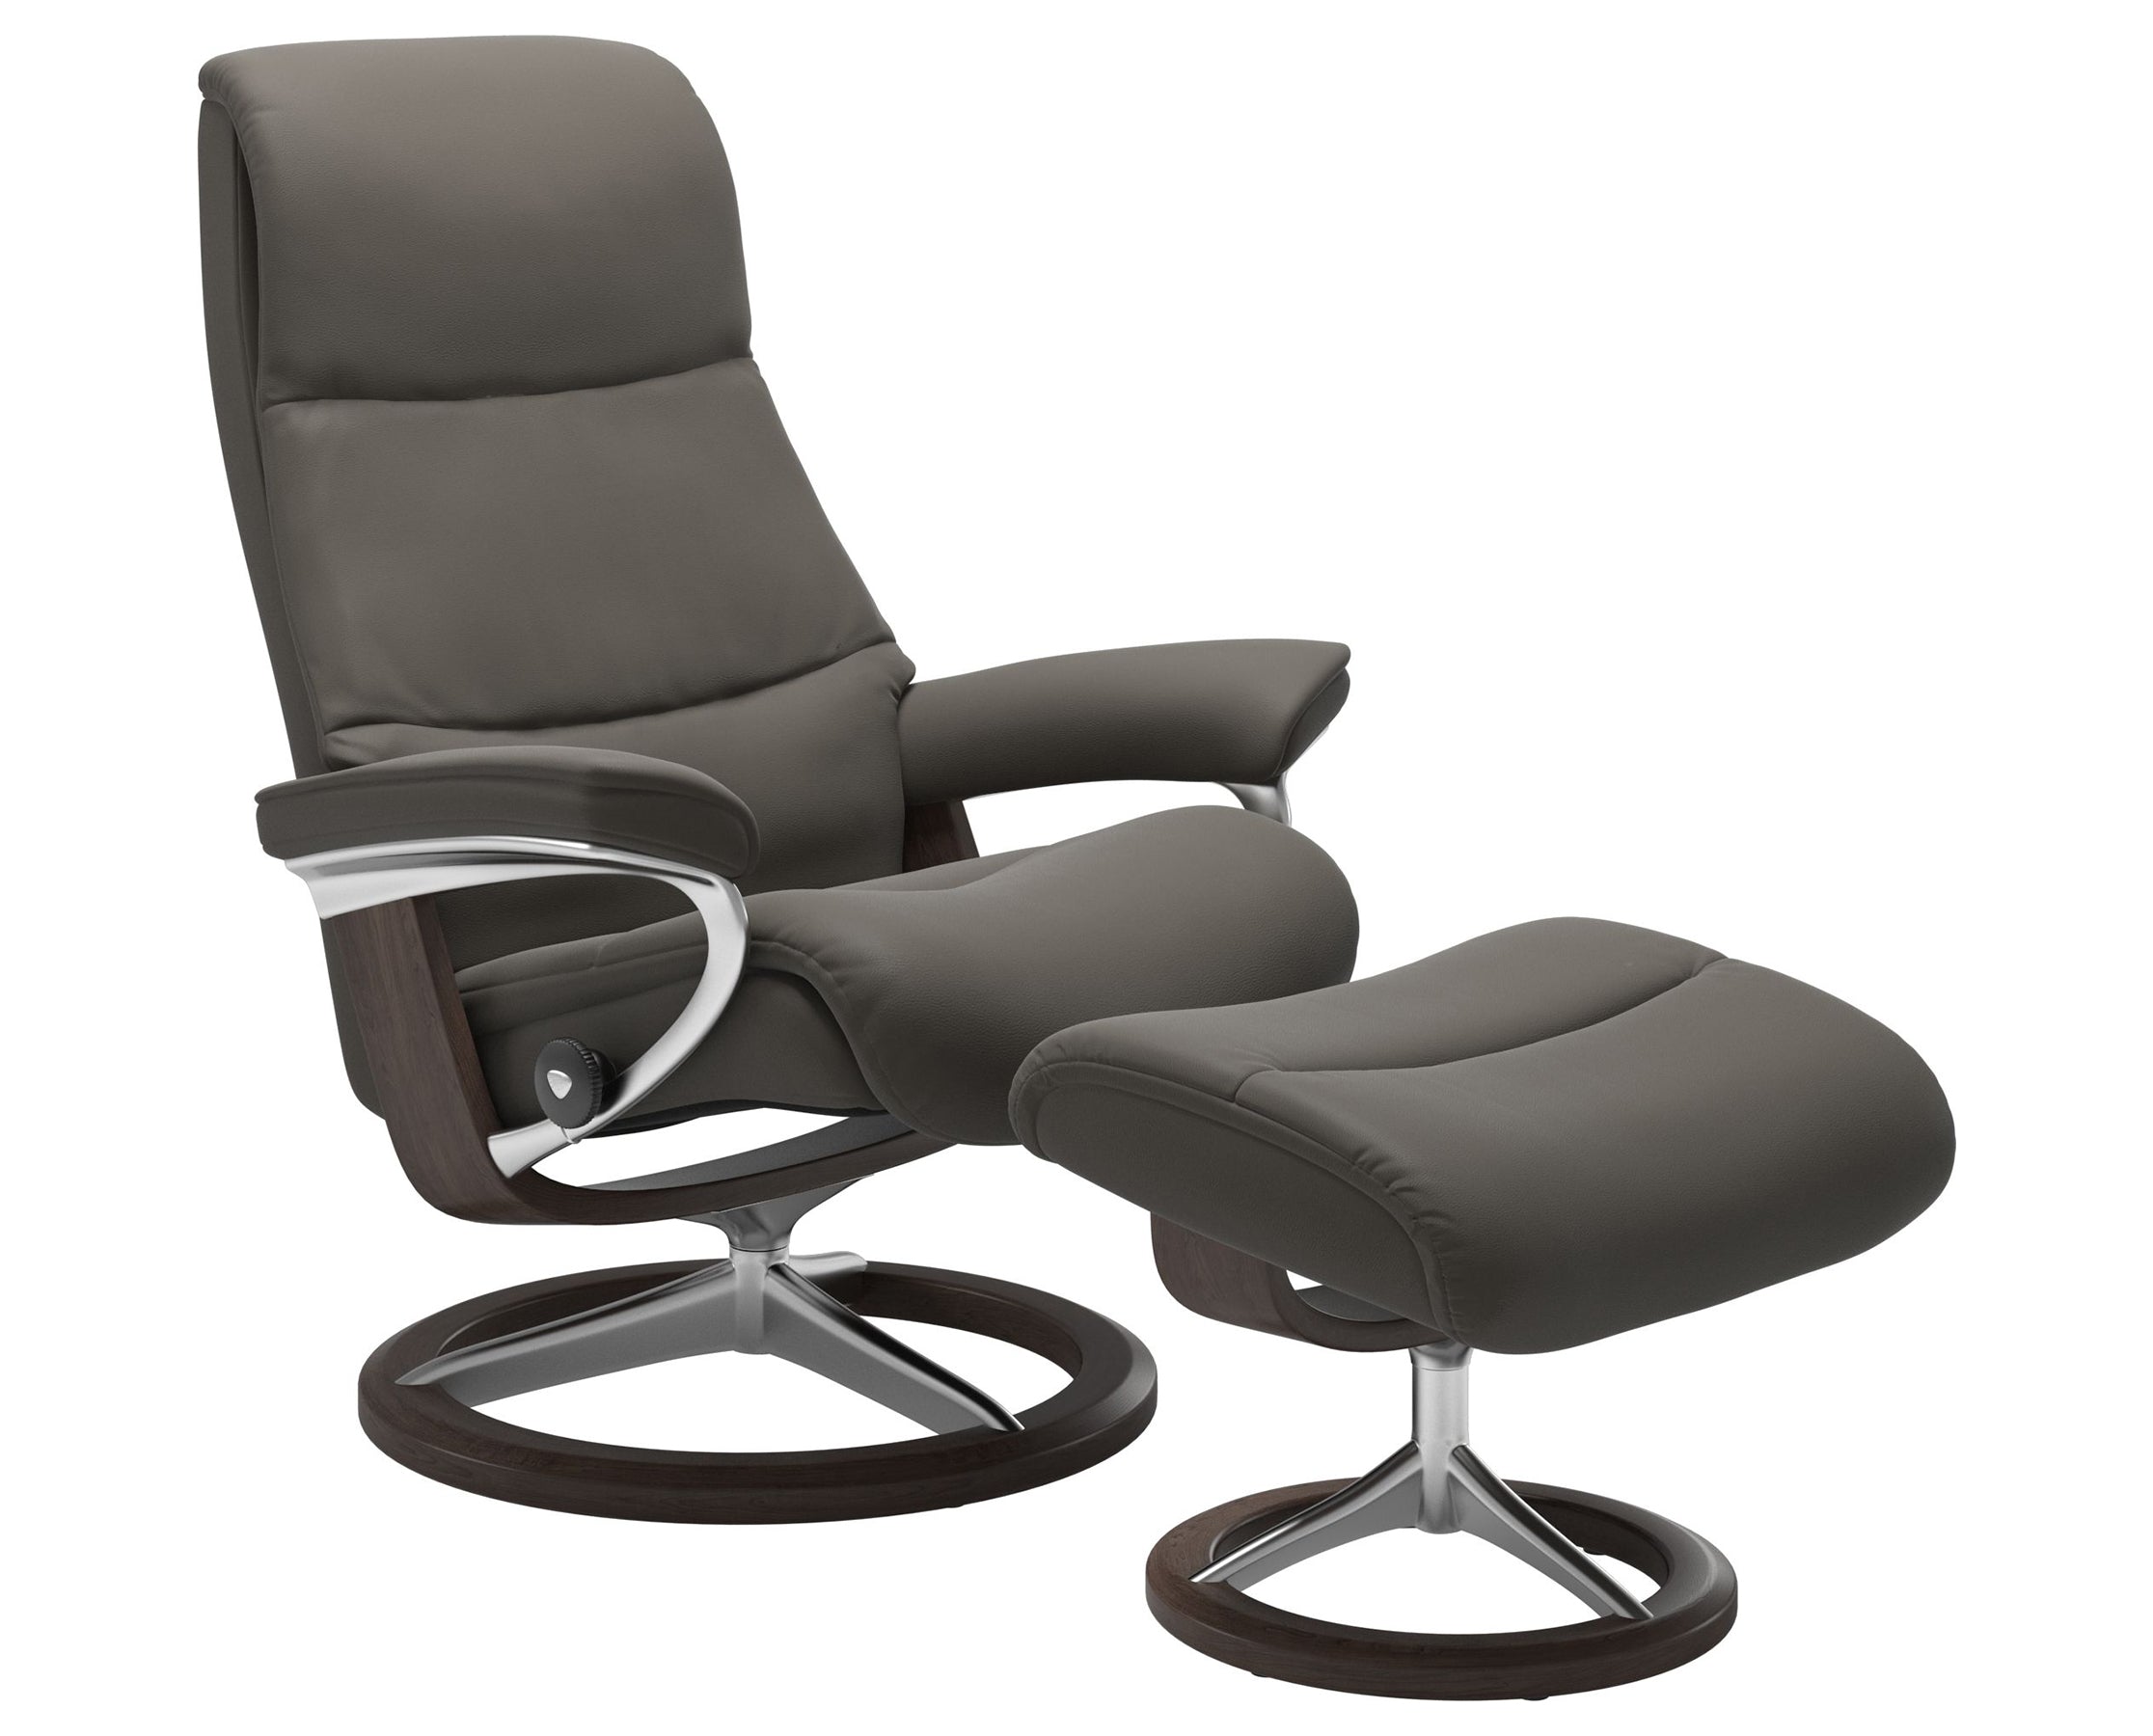 Paloma Leather Metal Grey S/M/L and Wenge Base | Stressless View Signature Recliner | Valley Ridge Furniture